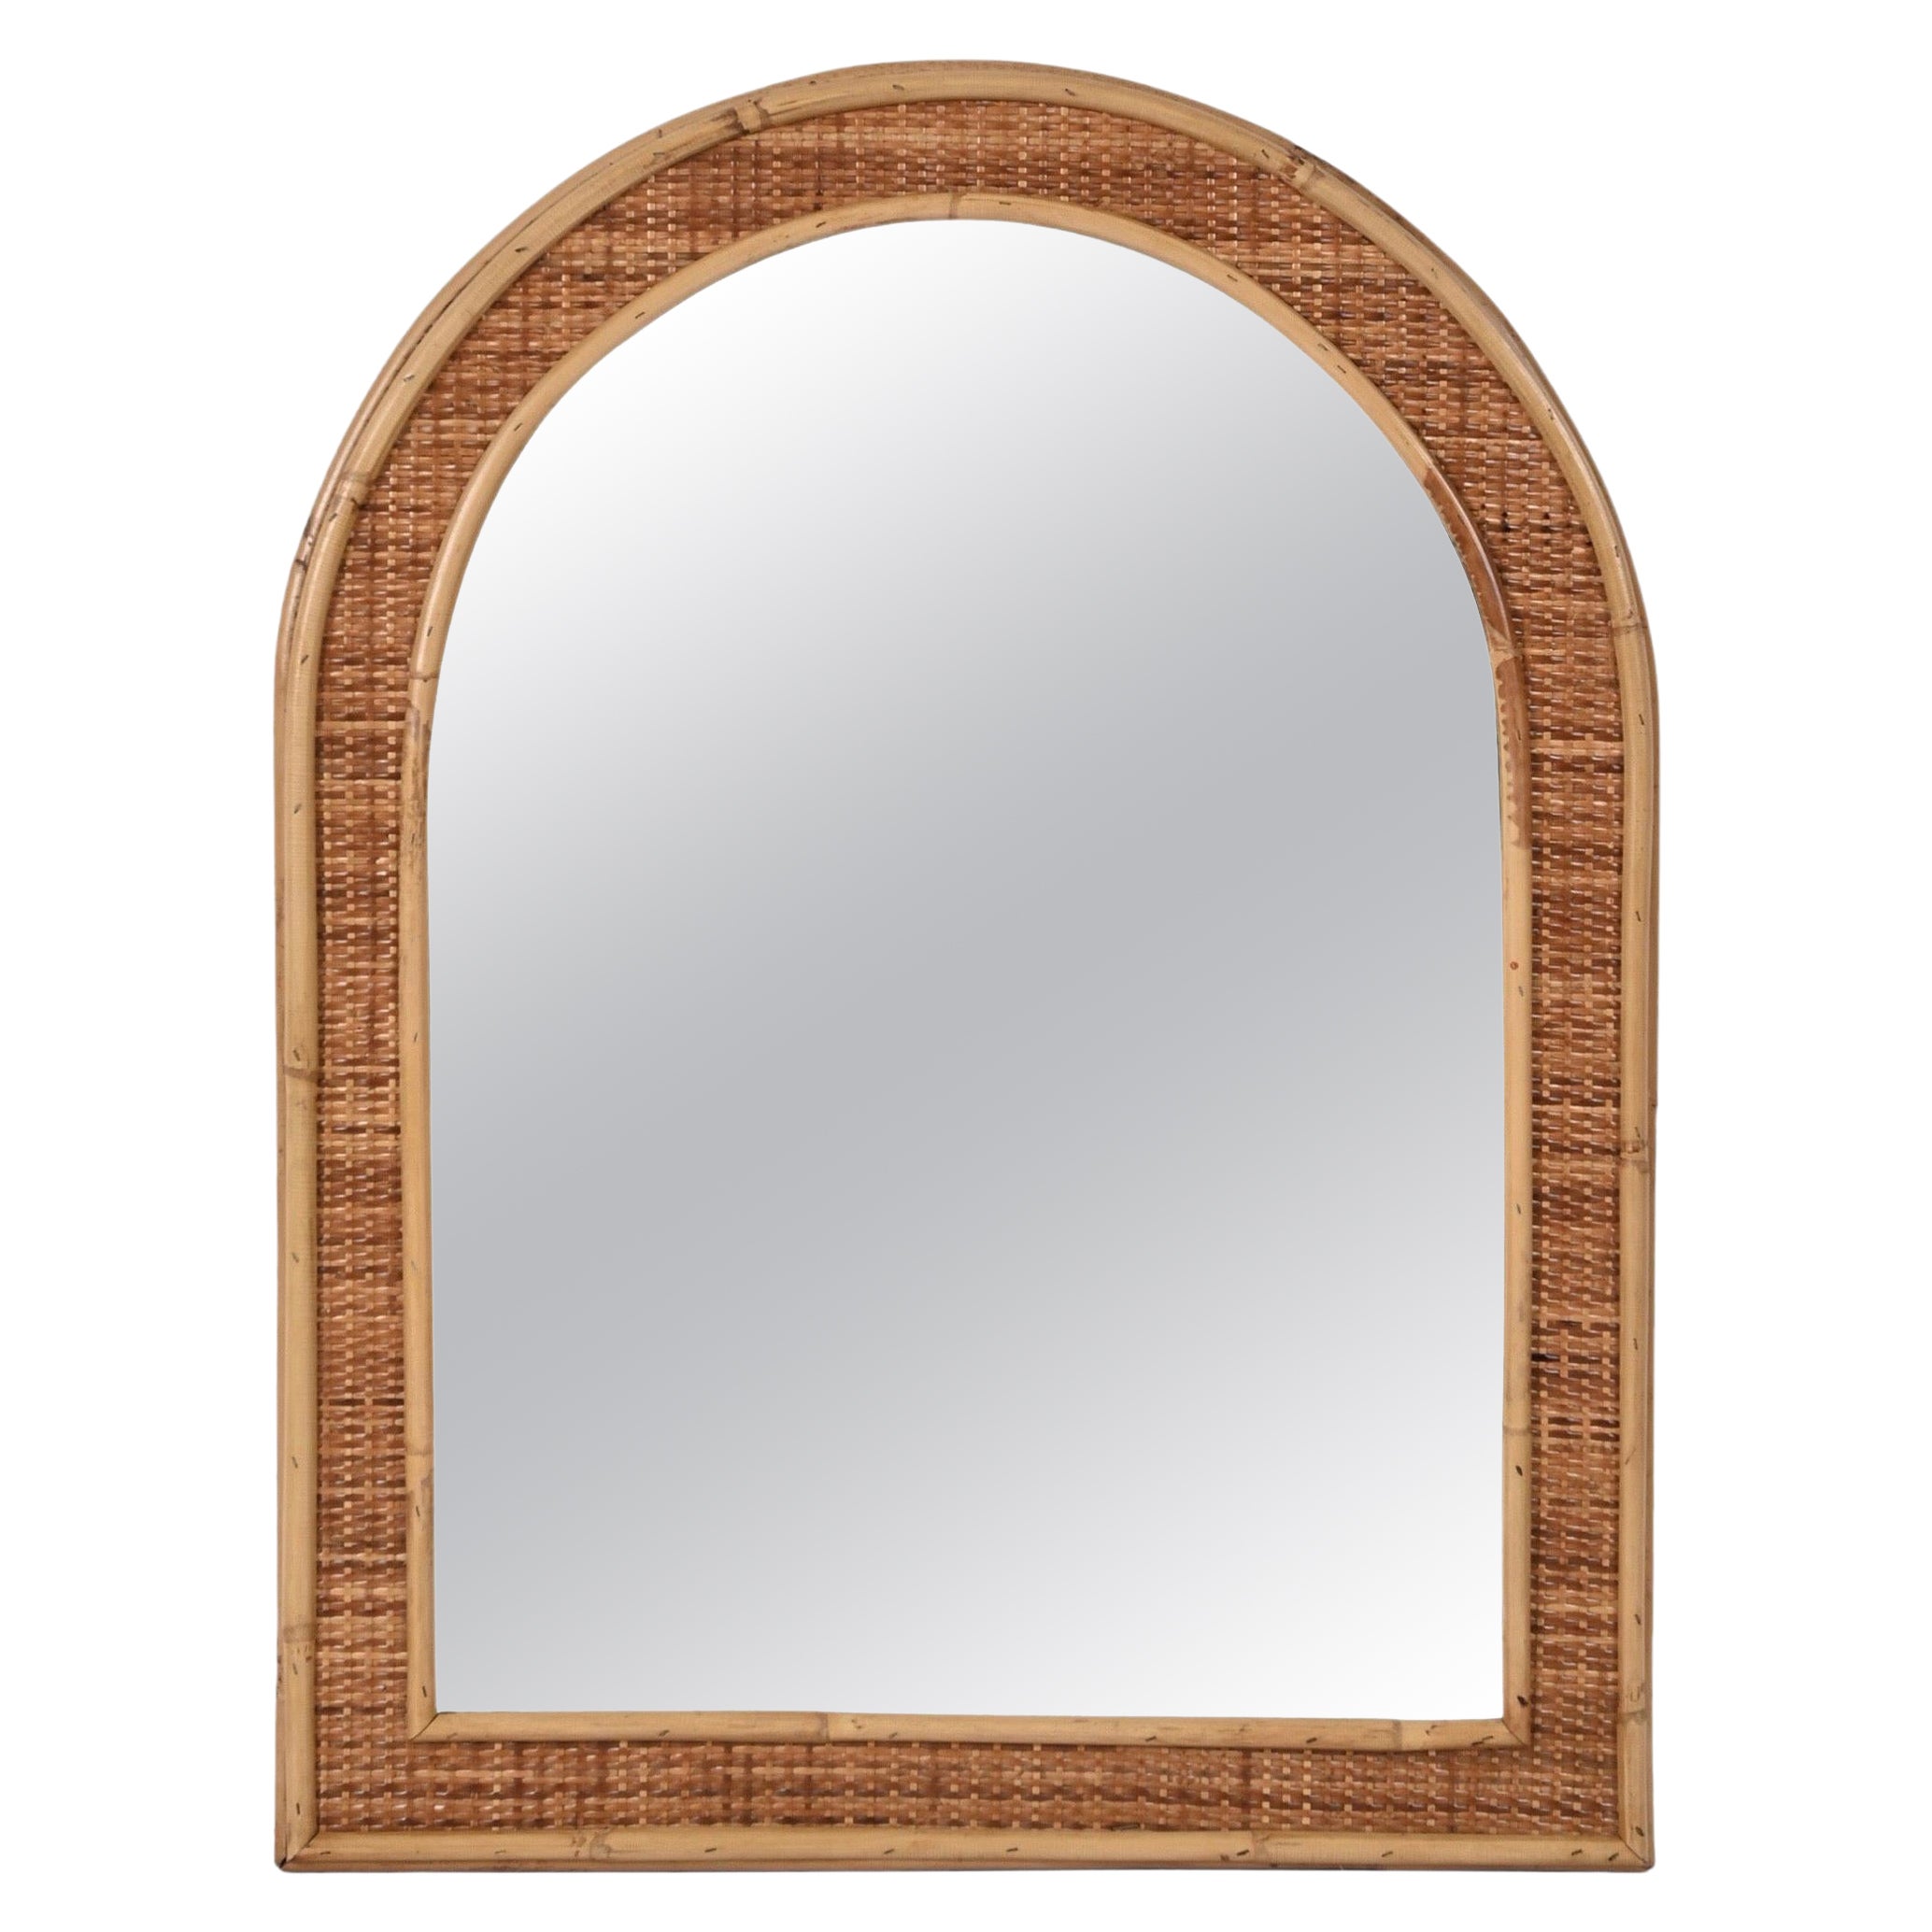 Mid-Century Bamboo and Woven Wicker Arch Mirror, Italy, 1970